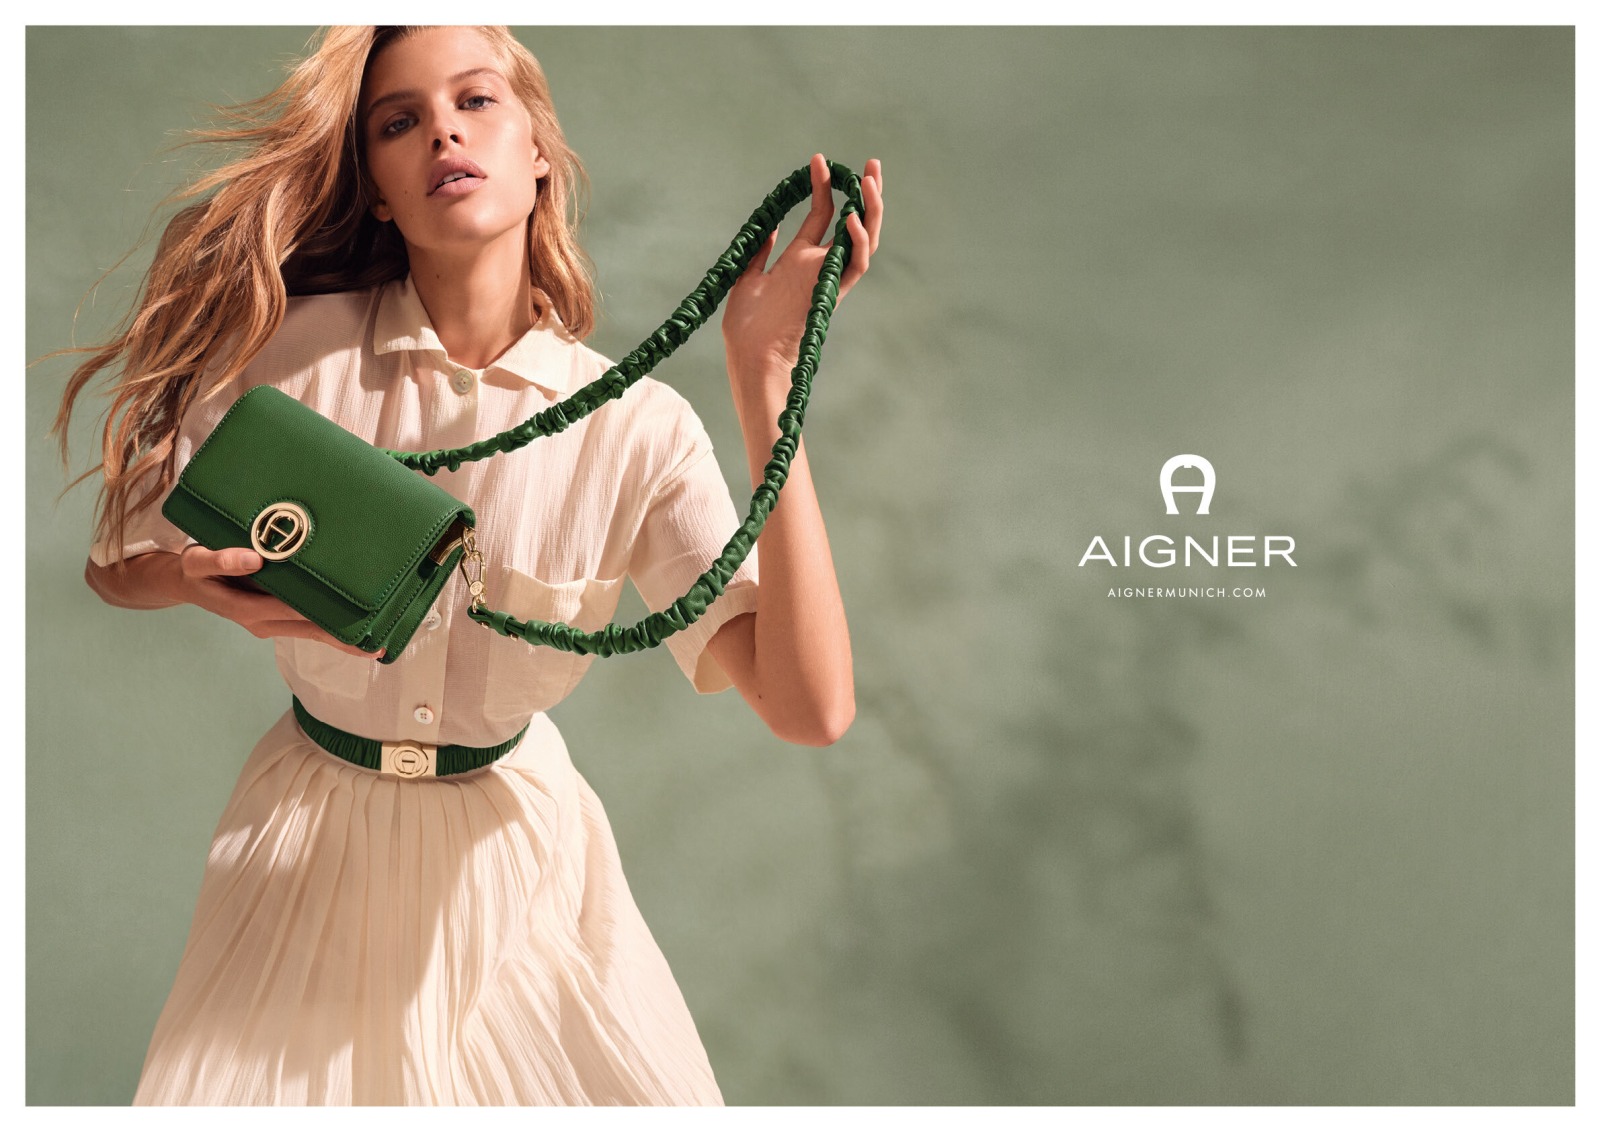 AIGNER 4 by Andreas ORTNER